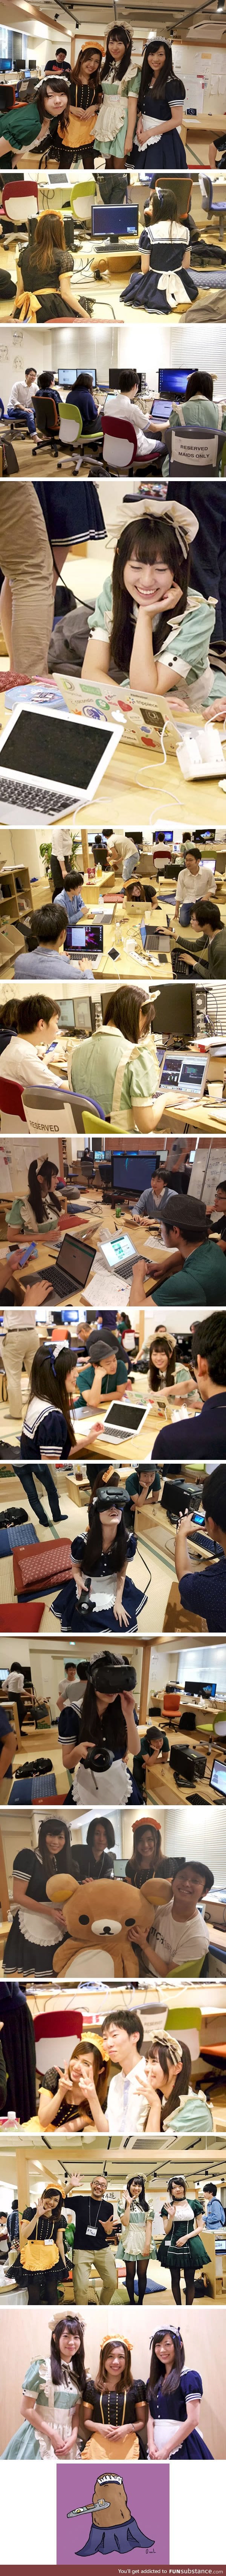 School in tokyo allows students to study with cute maids as they learn programming skills